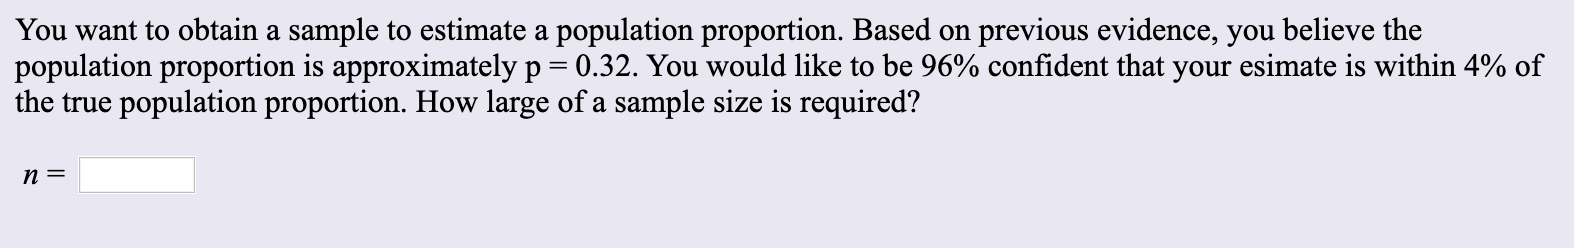 You want to obtain a sample to estimate a population proportion. Based on previous evidence, you believe the
population proportion is approximately p 0.32. You would like to be 96% confident that your esimate is within 4% of
the true population proportion. How large of a sample size is required?
n =
